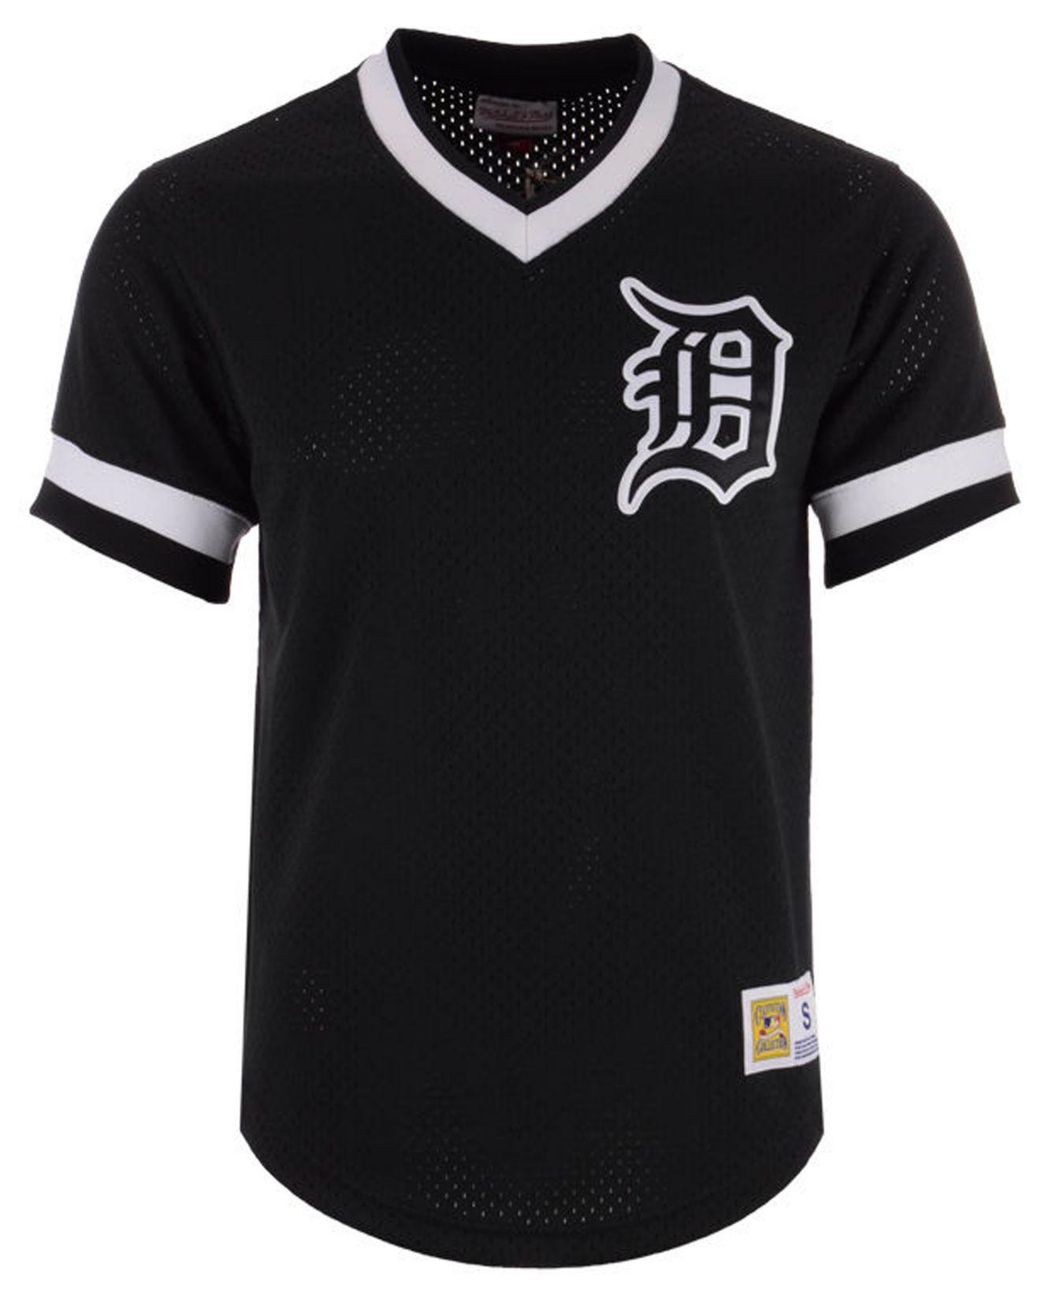 Mitchell & Ness Detroit Tigers Mesh V-neck Jersey in Black for Men